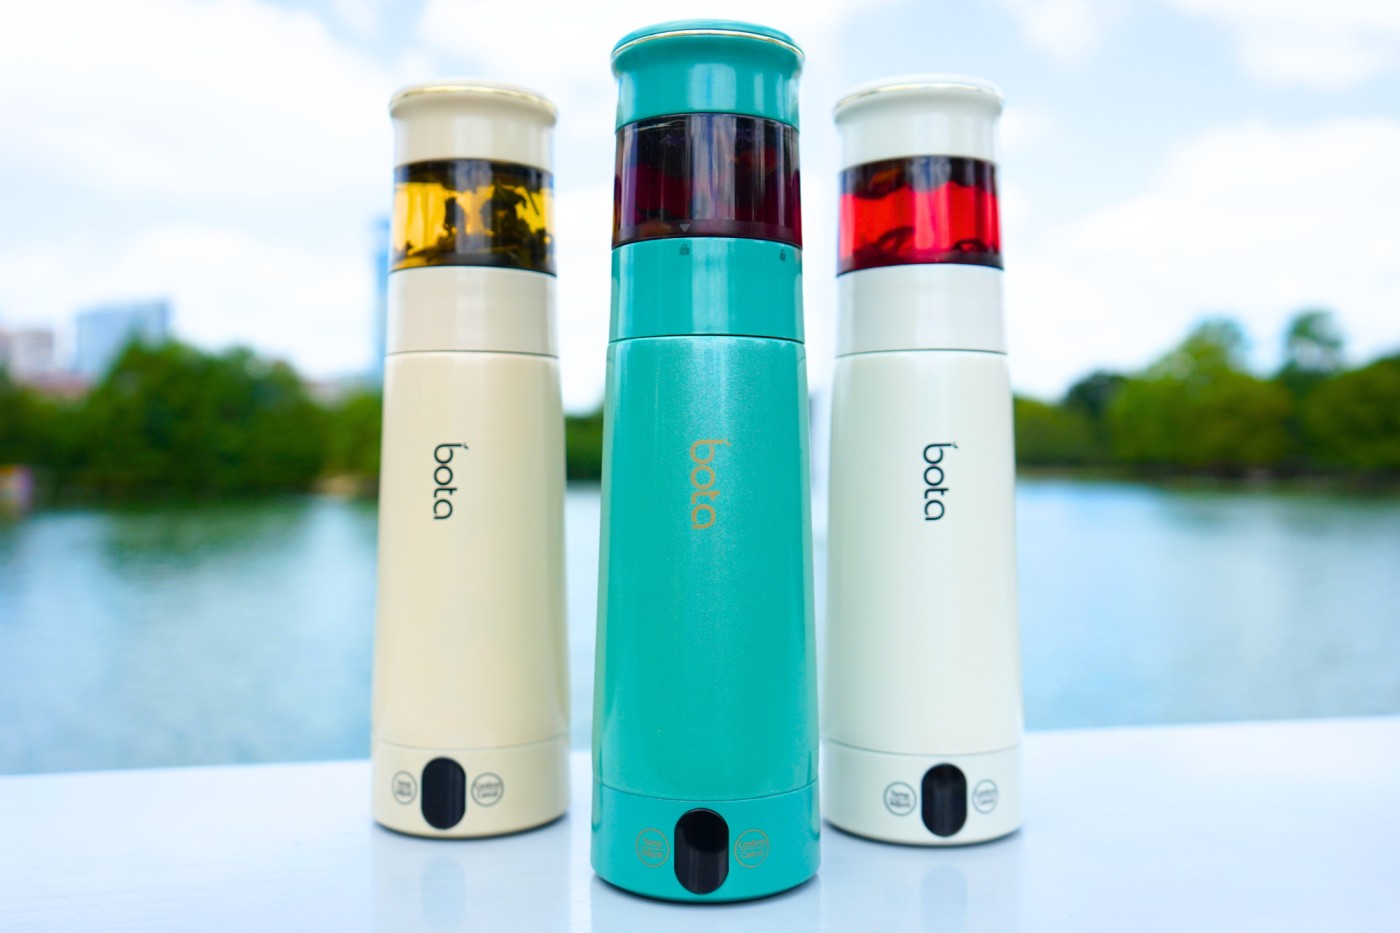 Bota Pearl White: The All-in-One Travel Tea Brewer